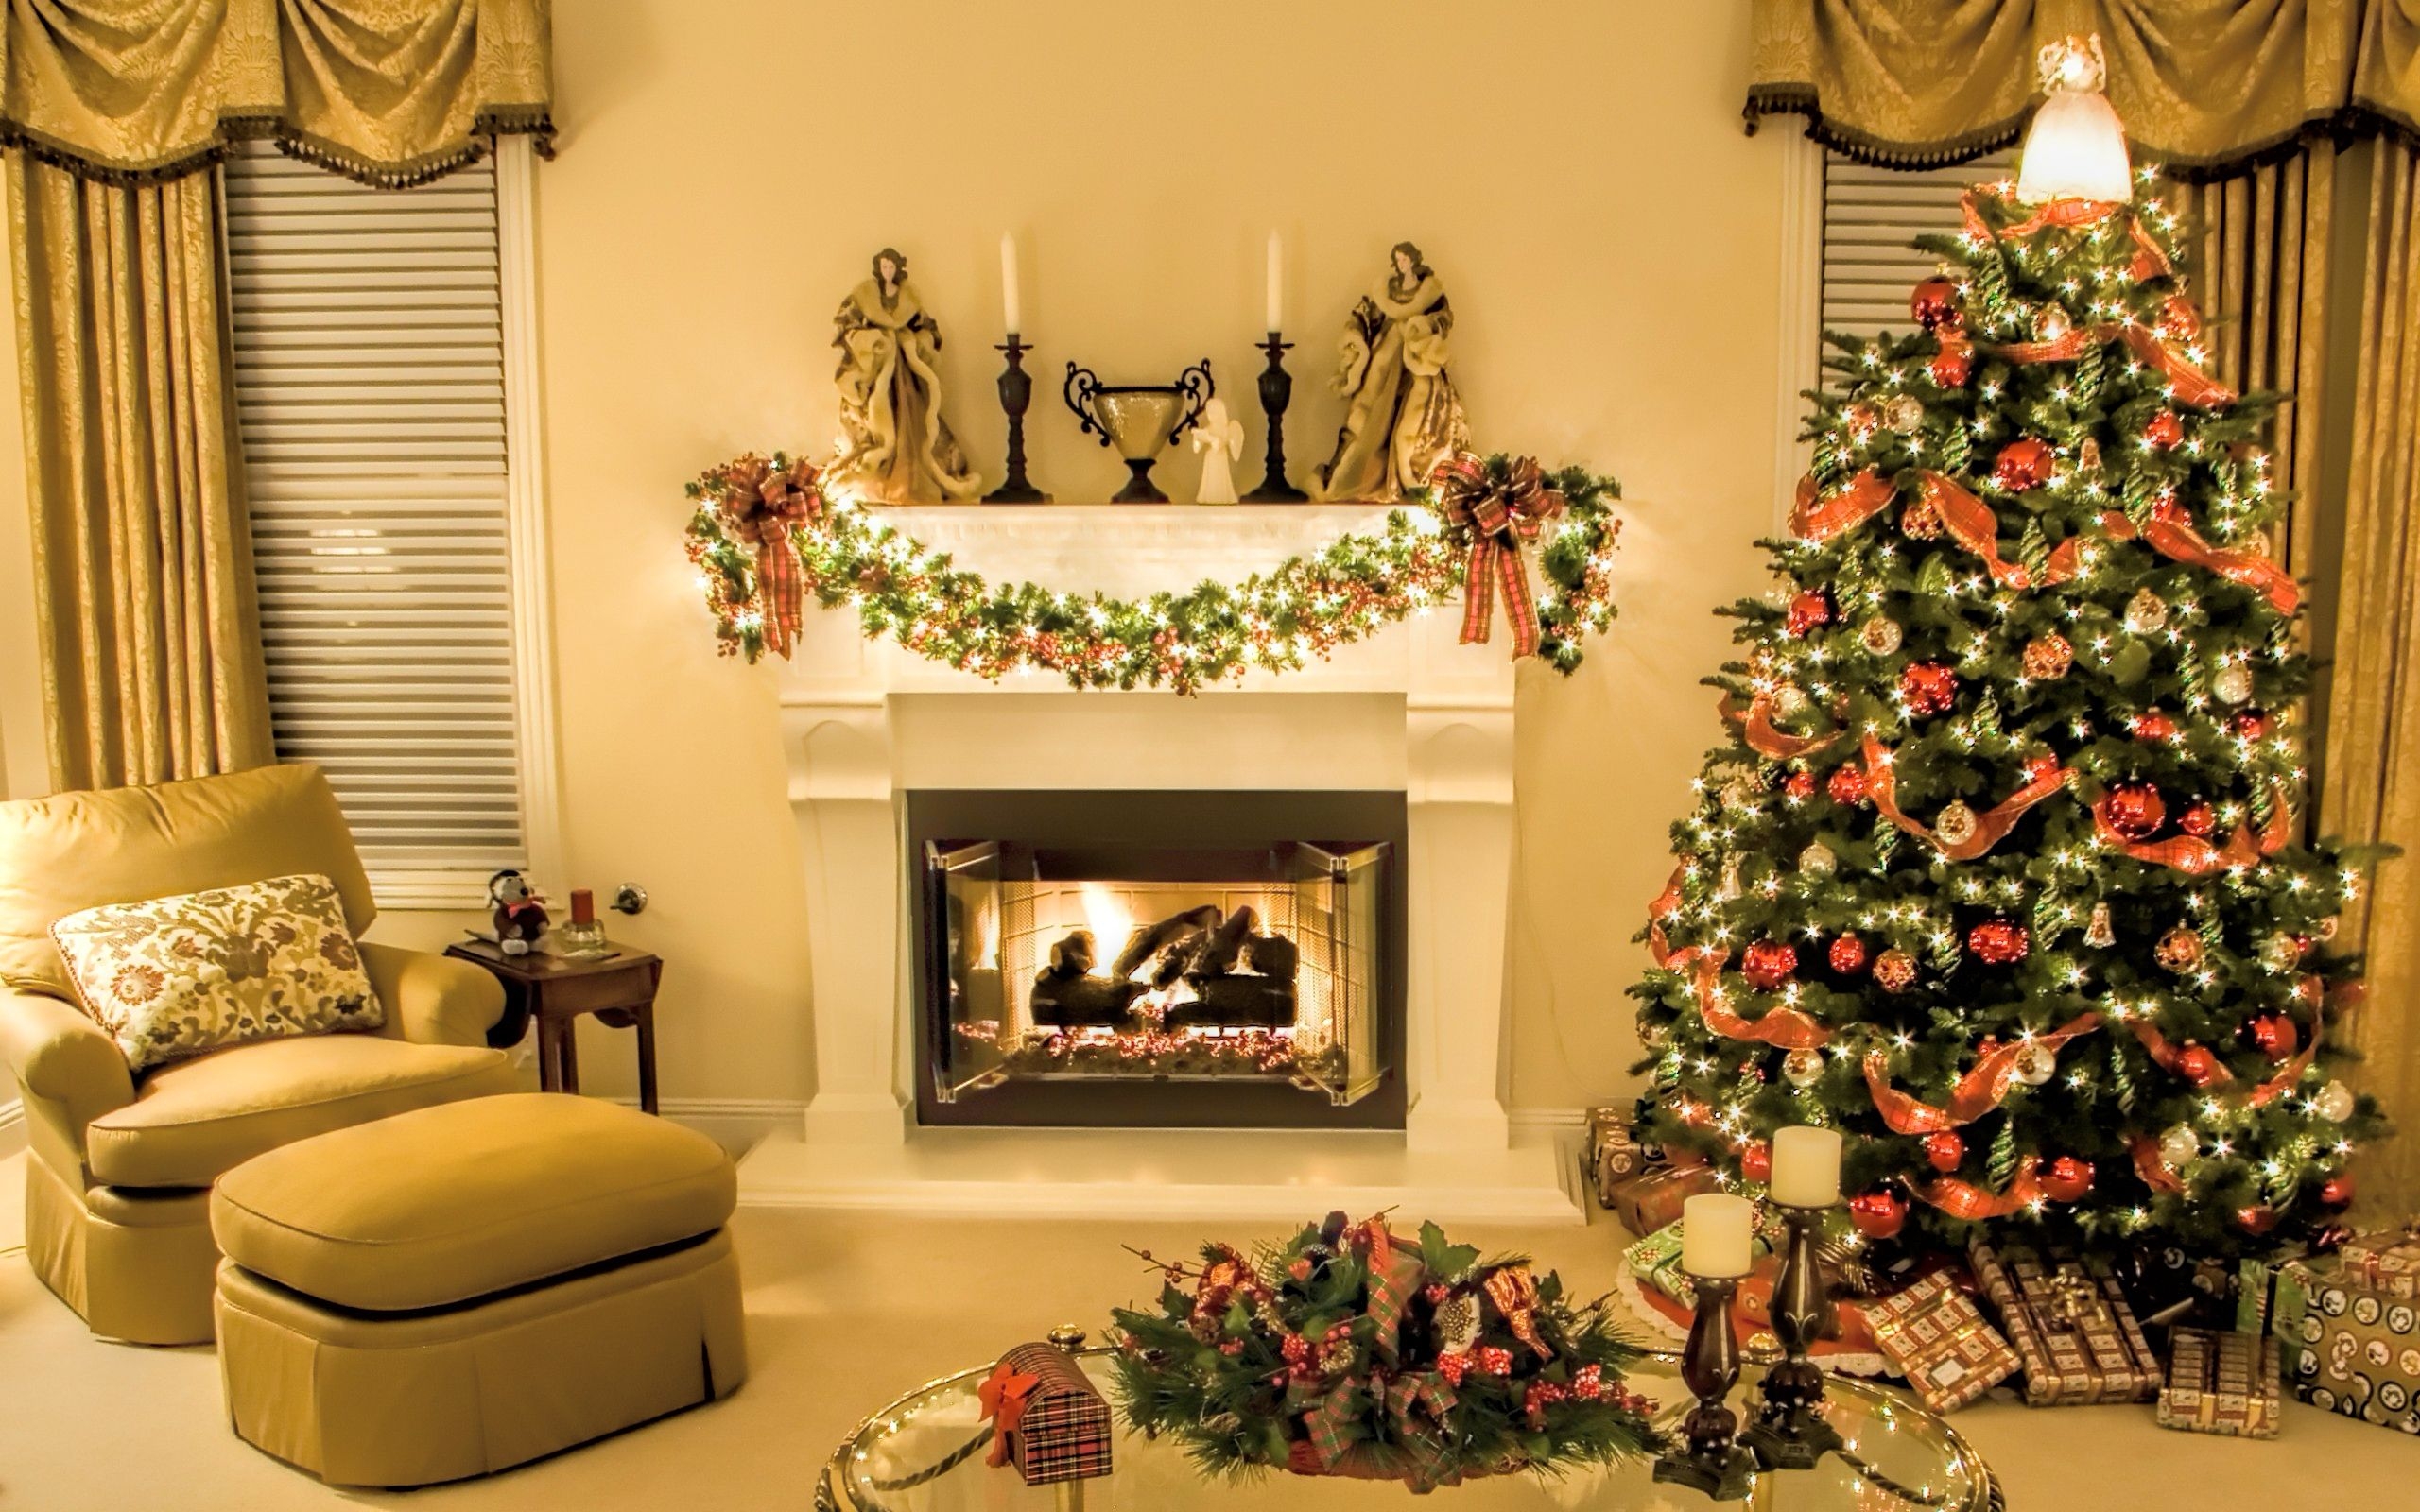 Living Room Arrangement With Fireplace Christmas Tree